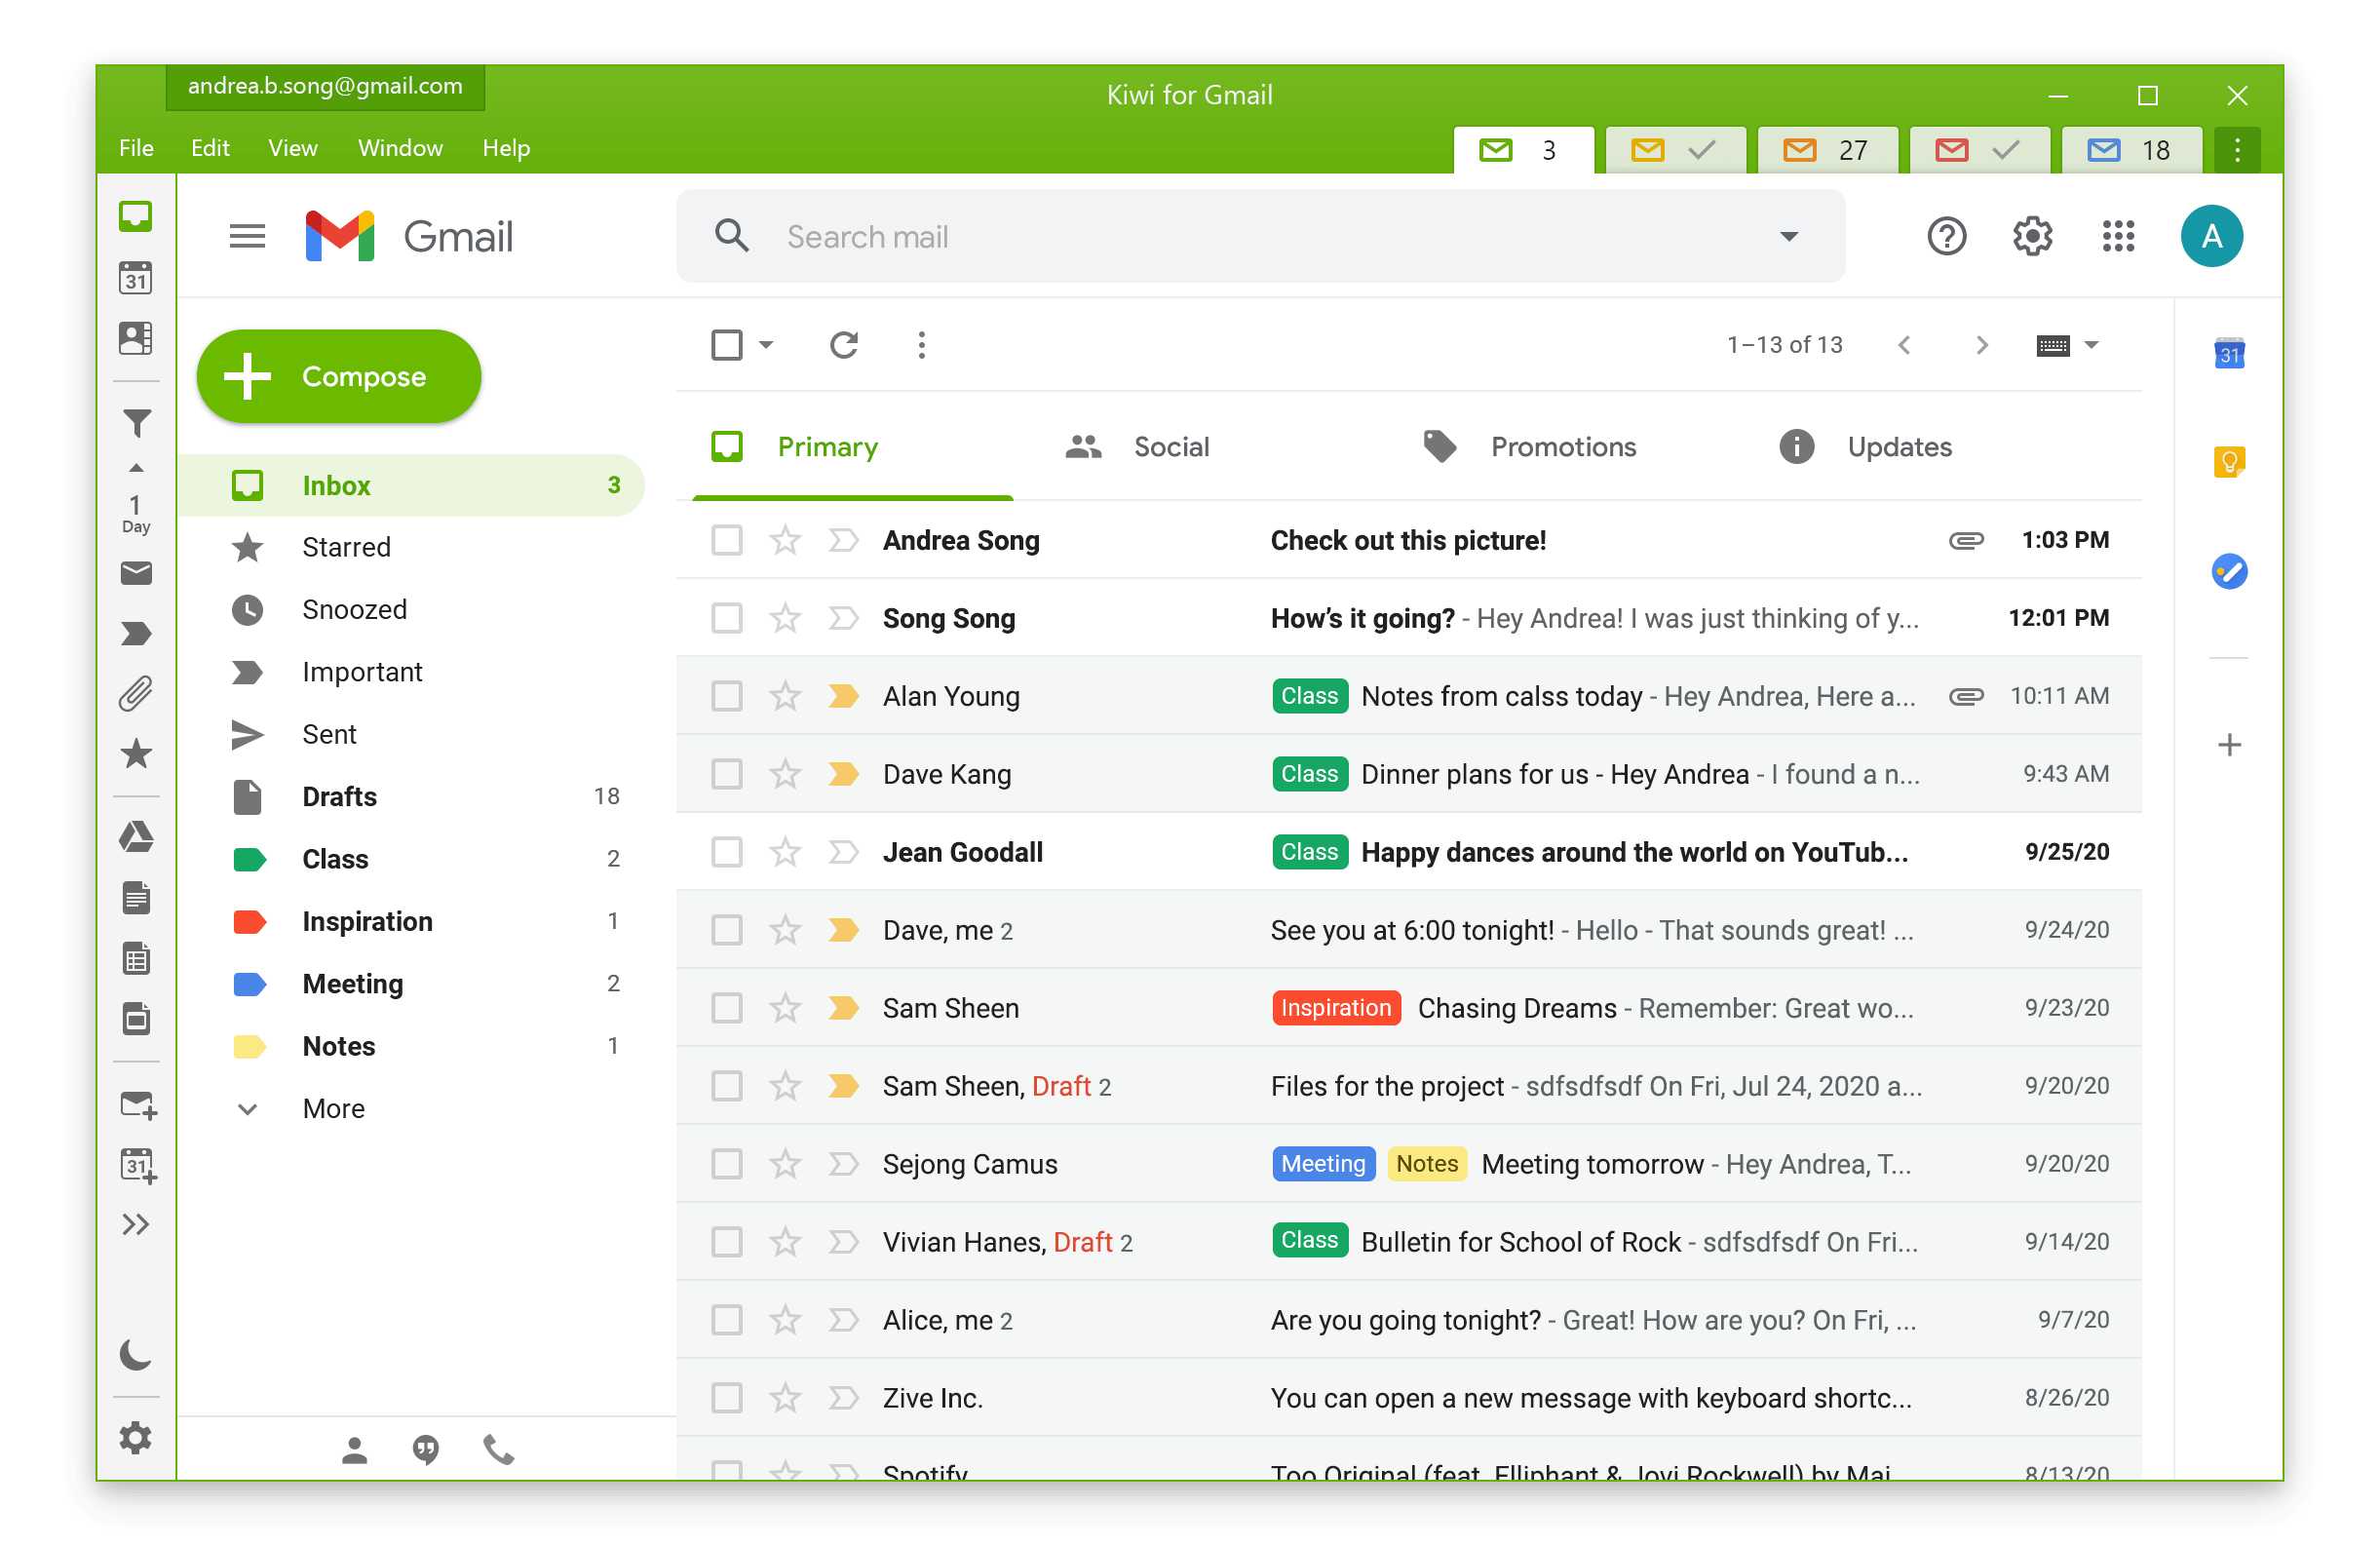 Kiwi for Gmail client interface